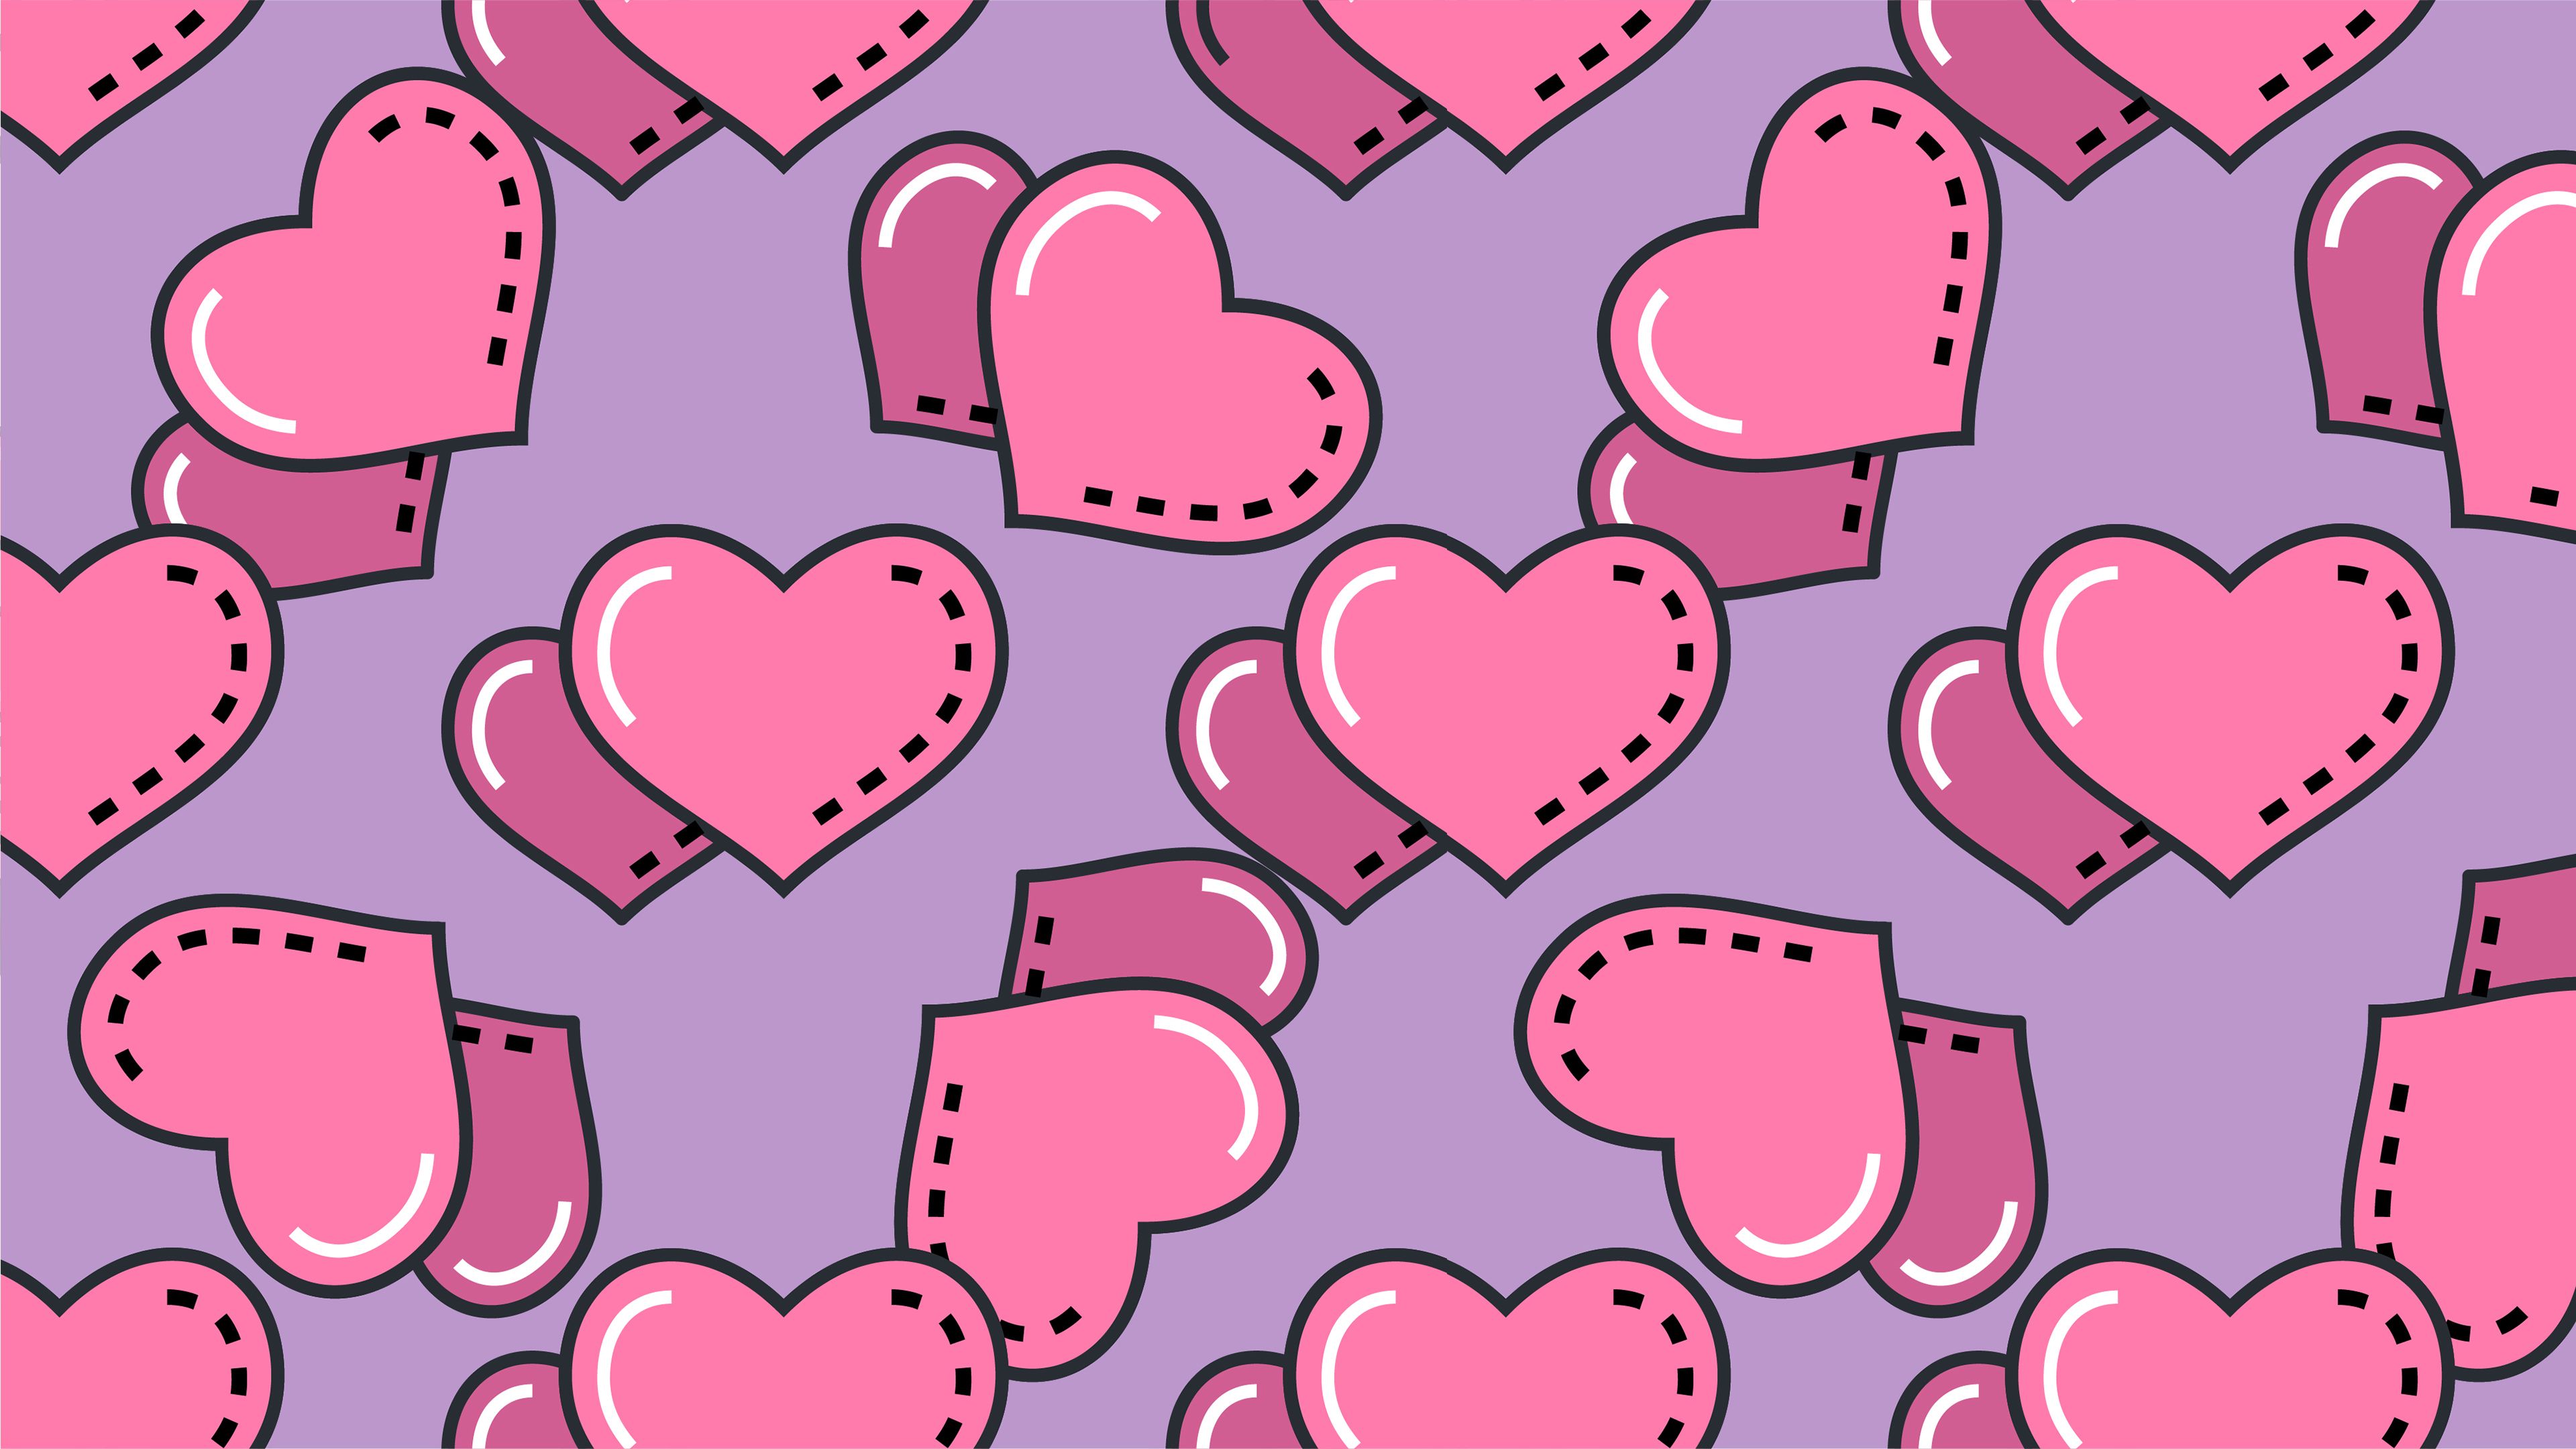 Only Love Hearts Chromebook Wallpaper